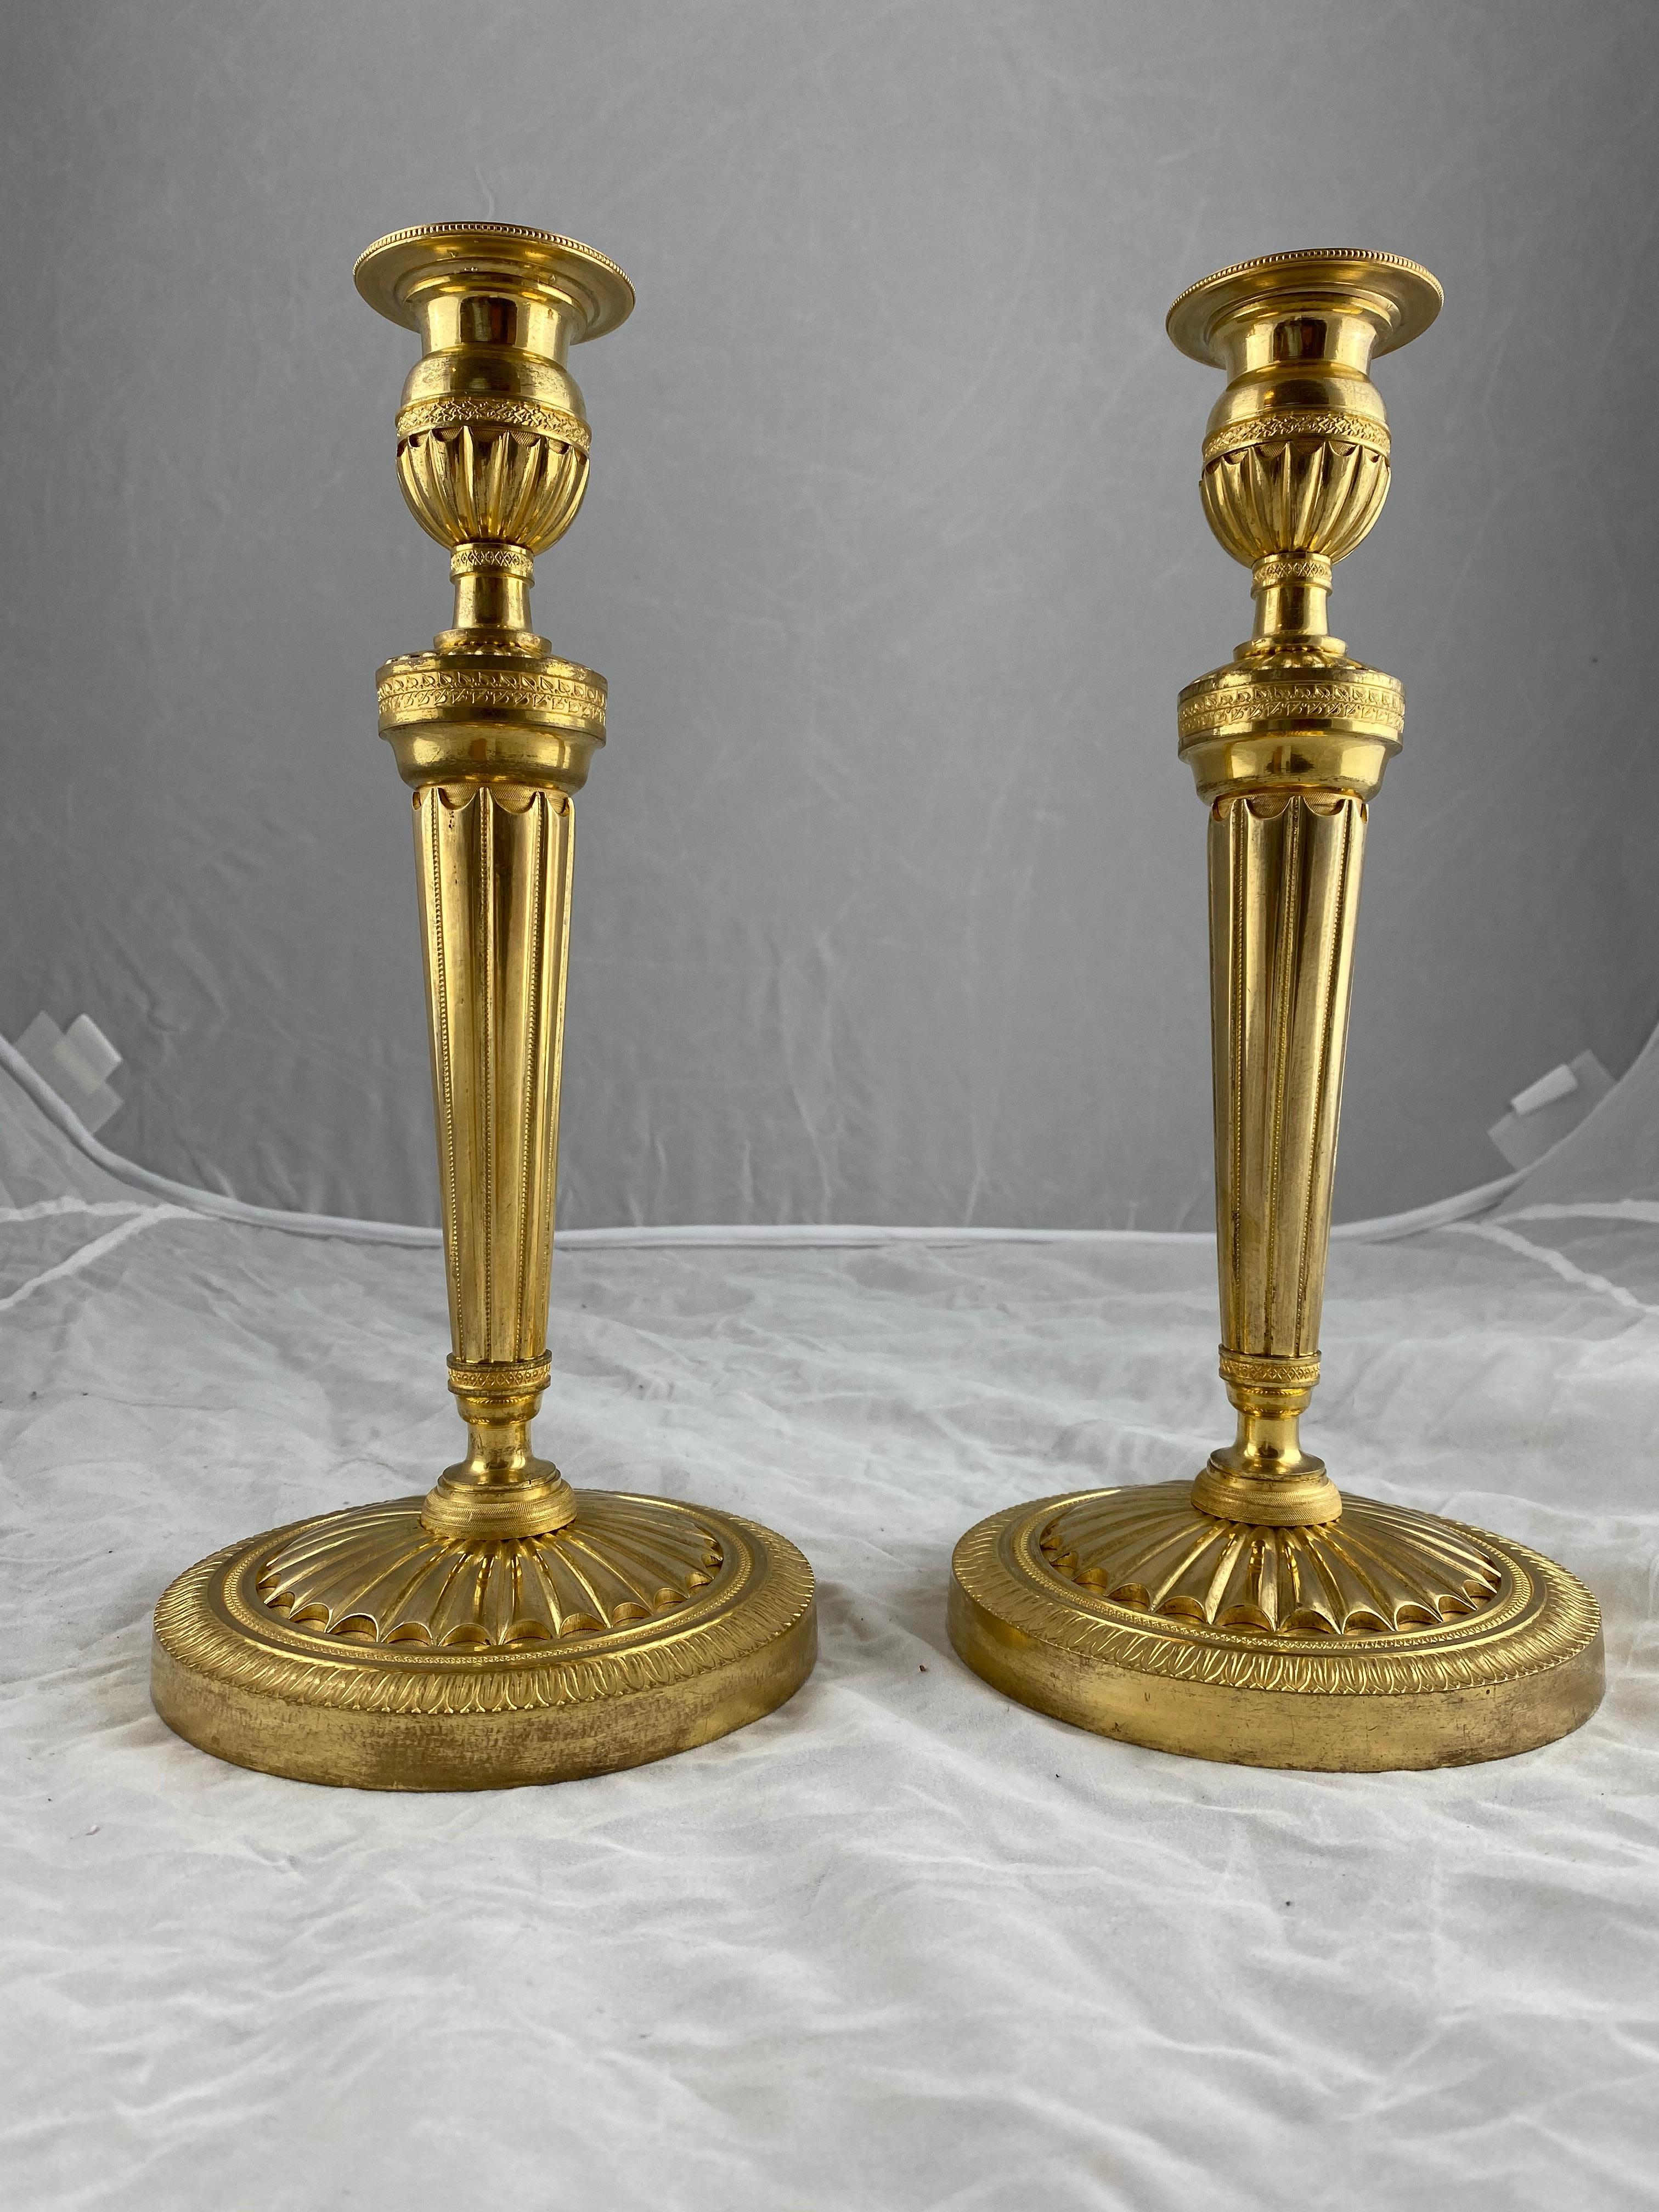 Good design, good quality. This is a pair of really nice candlesticks. Everything is right. The quality of the casting and chiseling together with the nice condition makes these a pair of keepers.